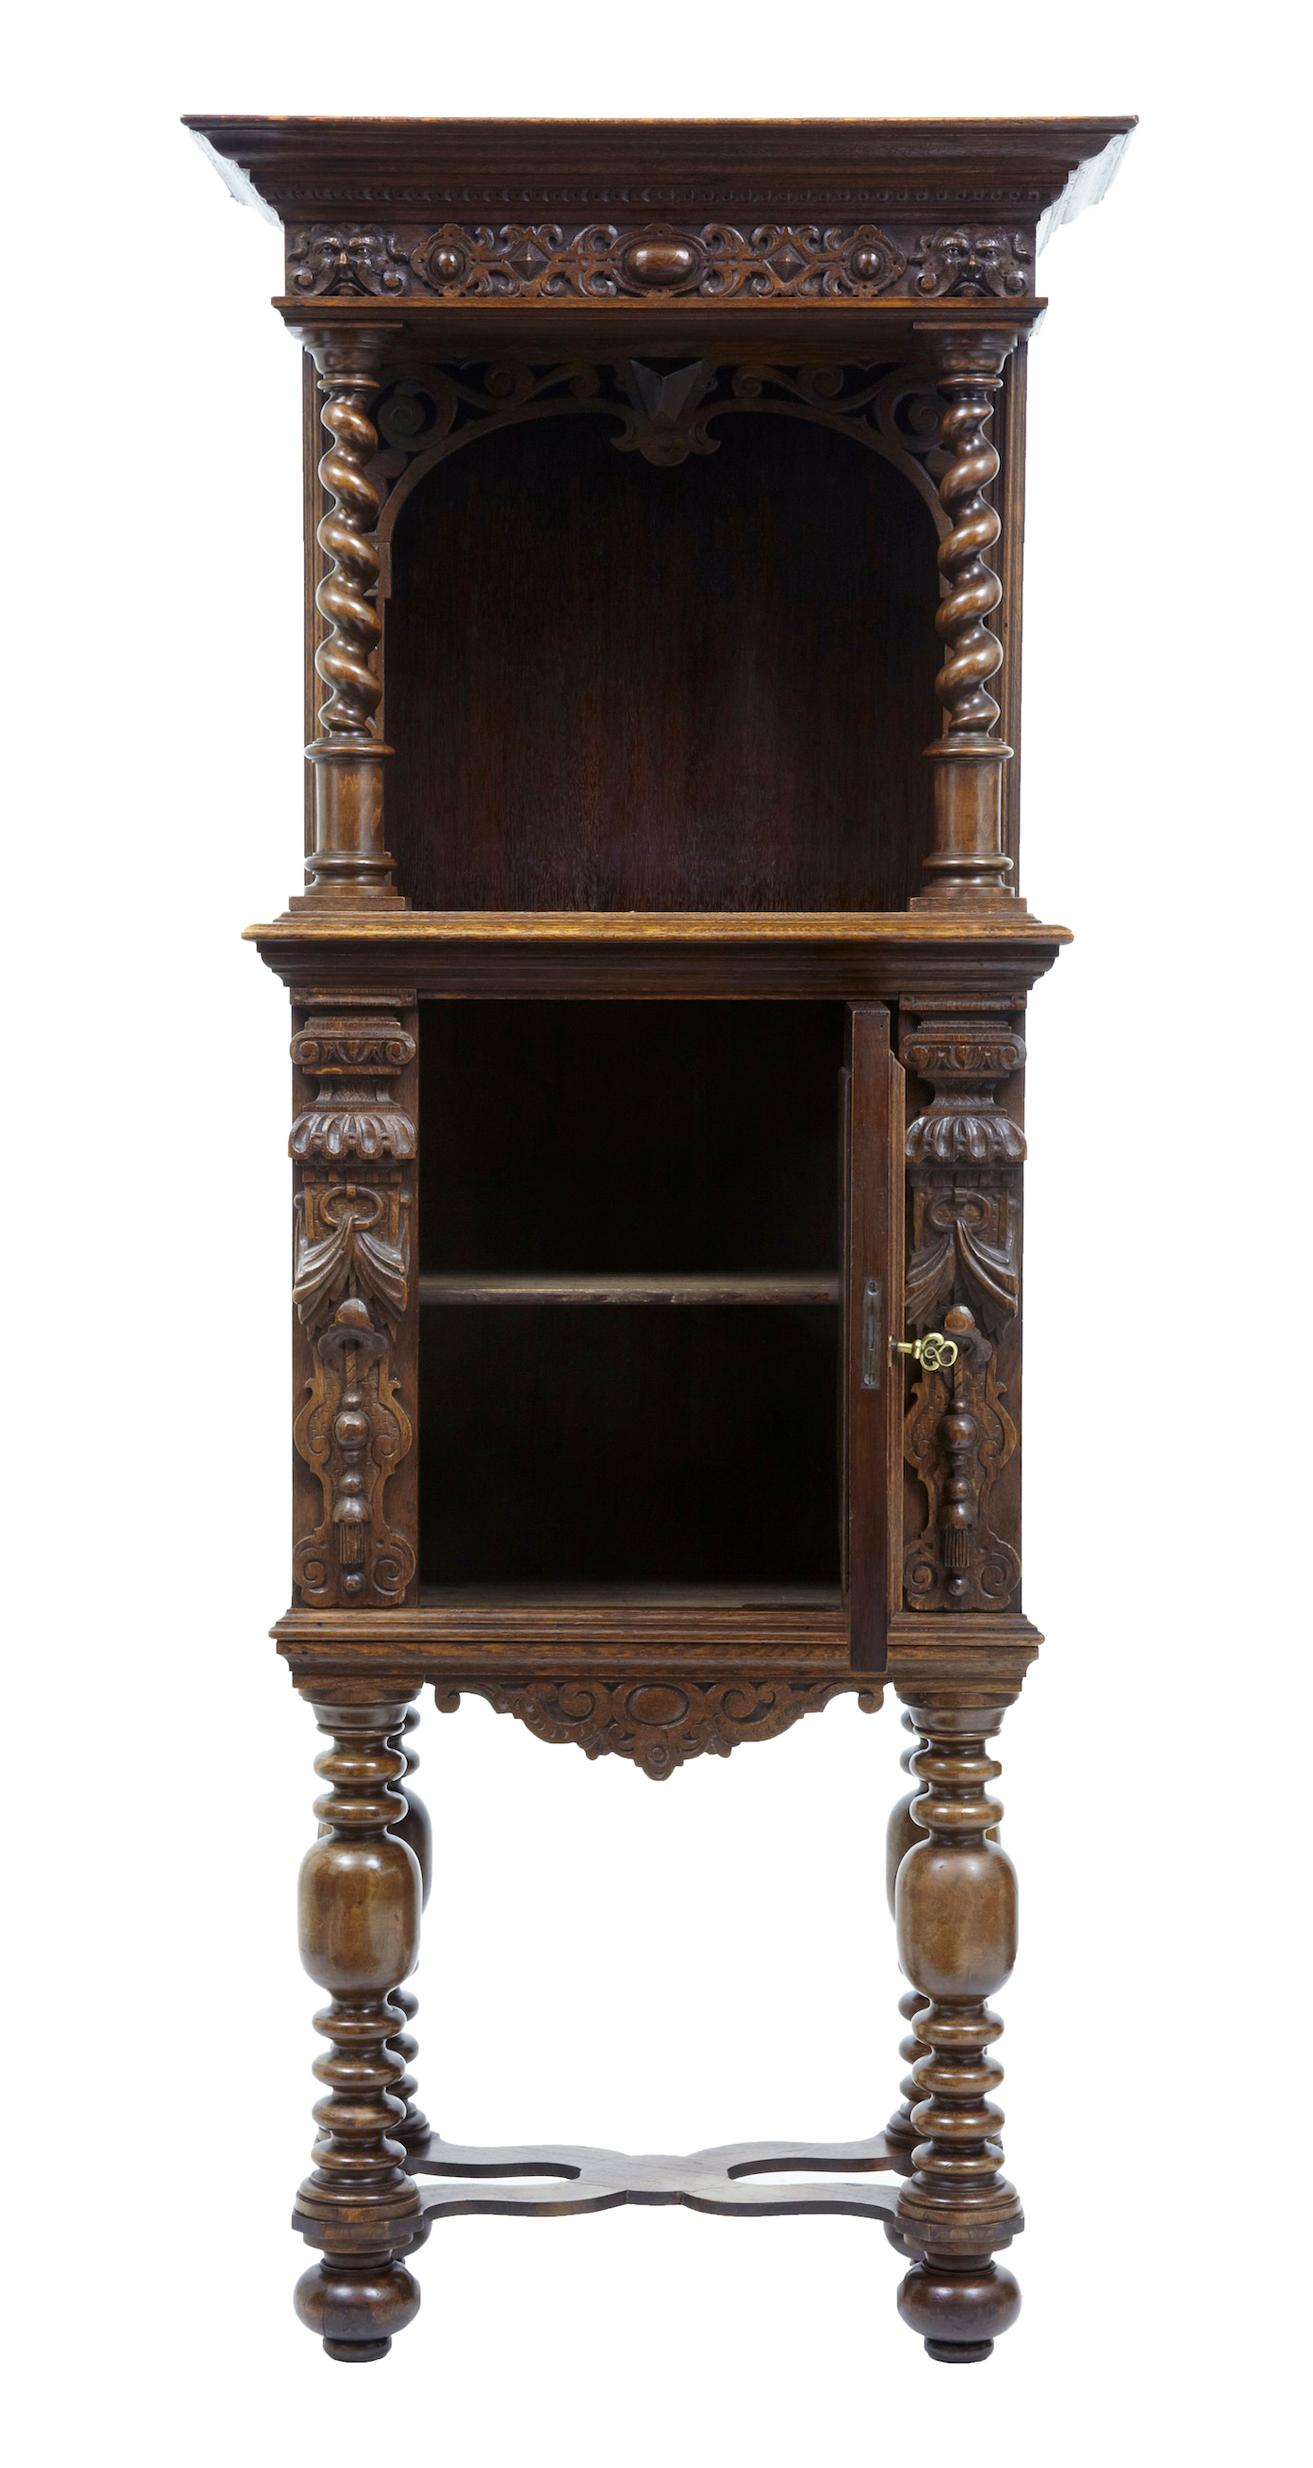 19th century Flemish carved oak hall cupboard on stand, circa 1870.

Fine quality Victorian oak hall cupboard, incorporating older carved elements. Main feature of this unusual piece is the carved Adam and eve panel on the door. Comprising of 2